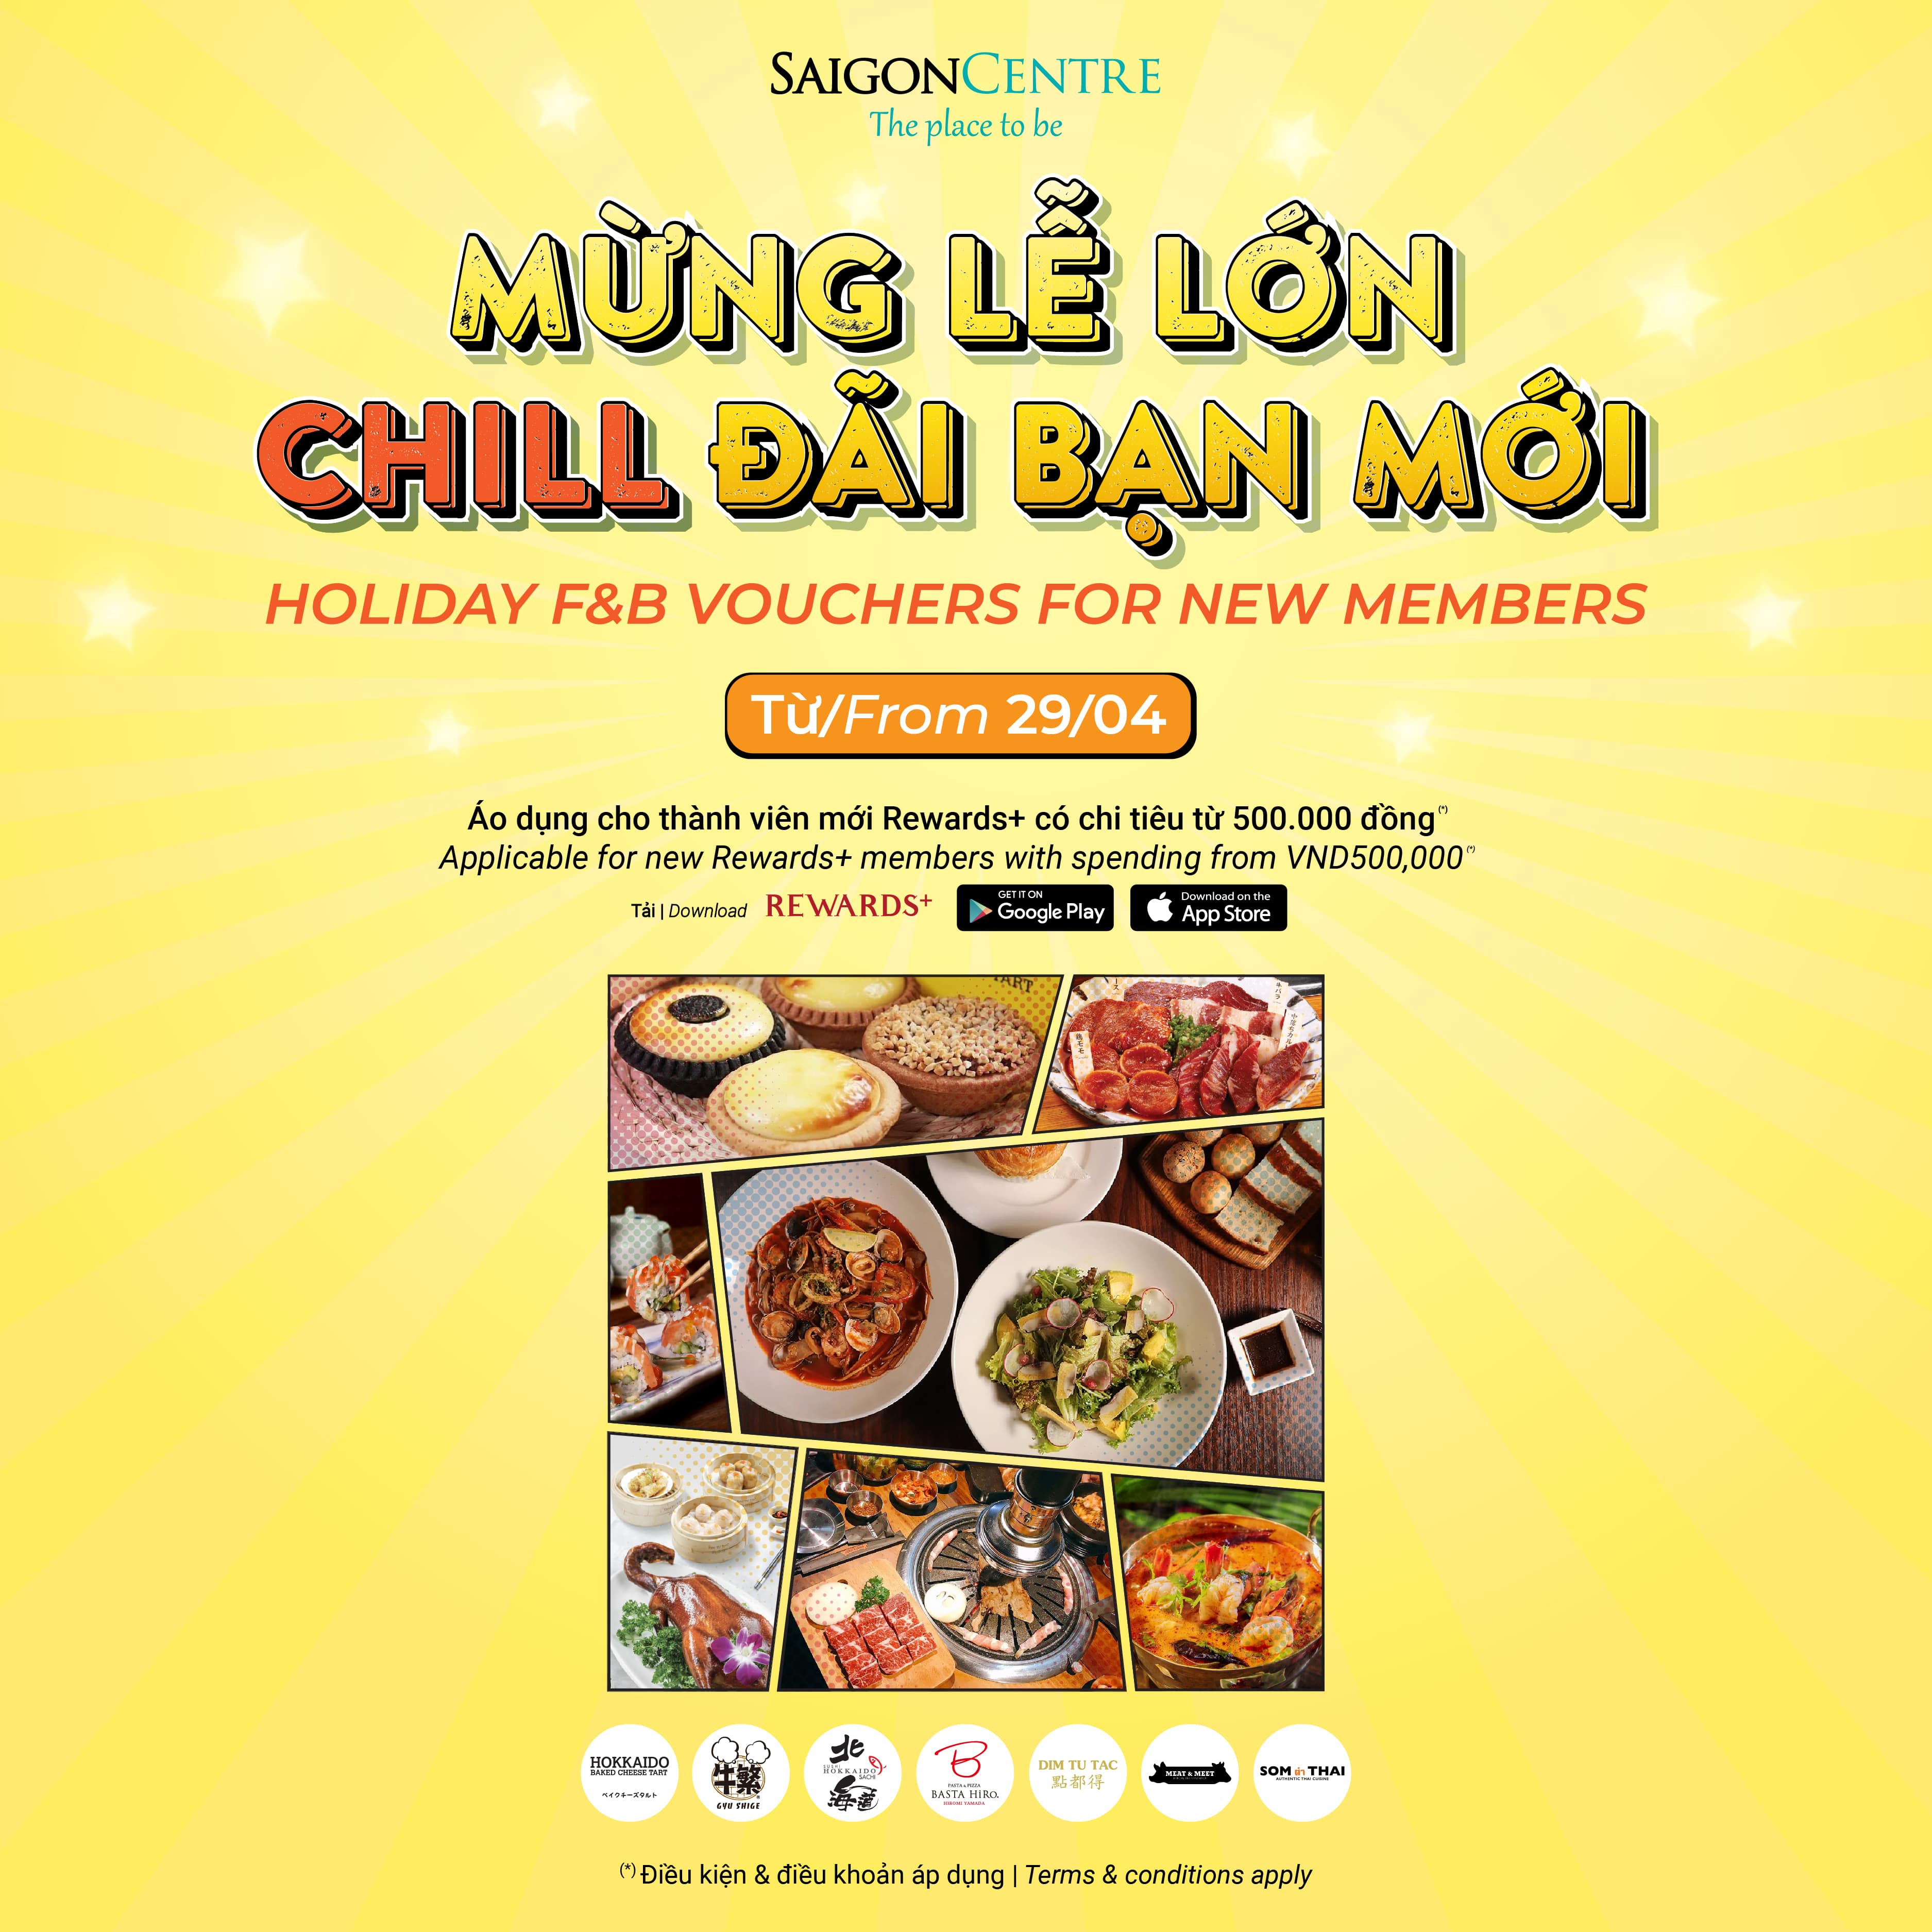 HOLIDAY F&B VOUCHERS FOR NEW MEMBERS